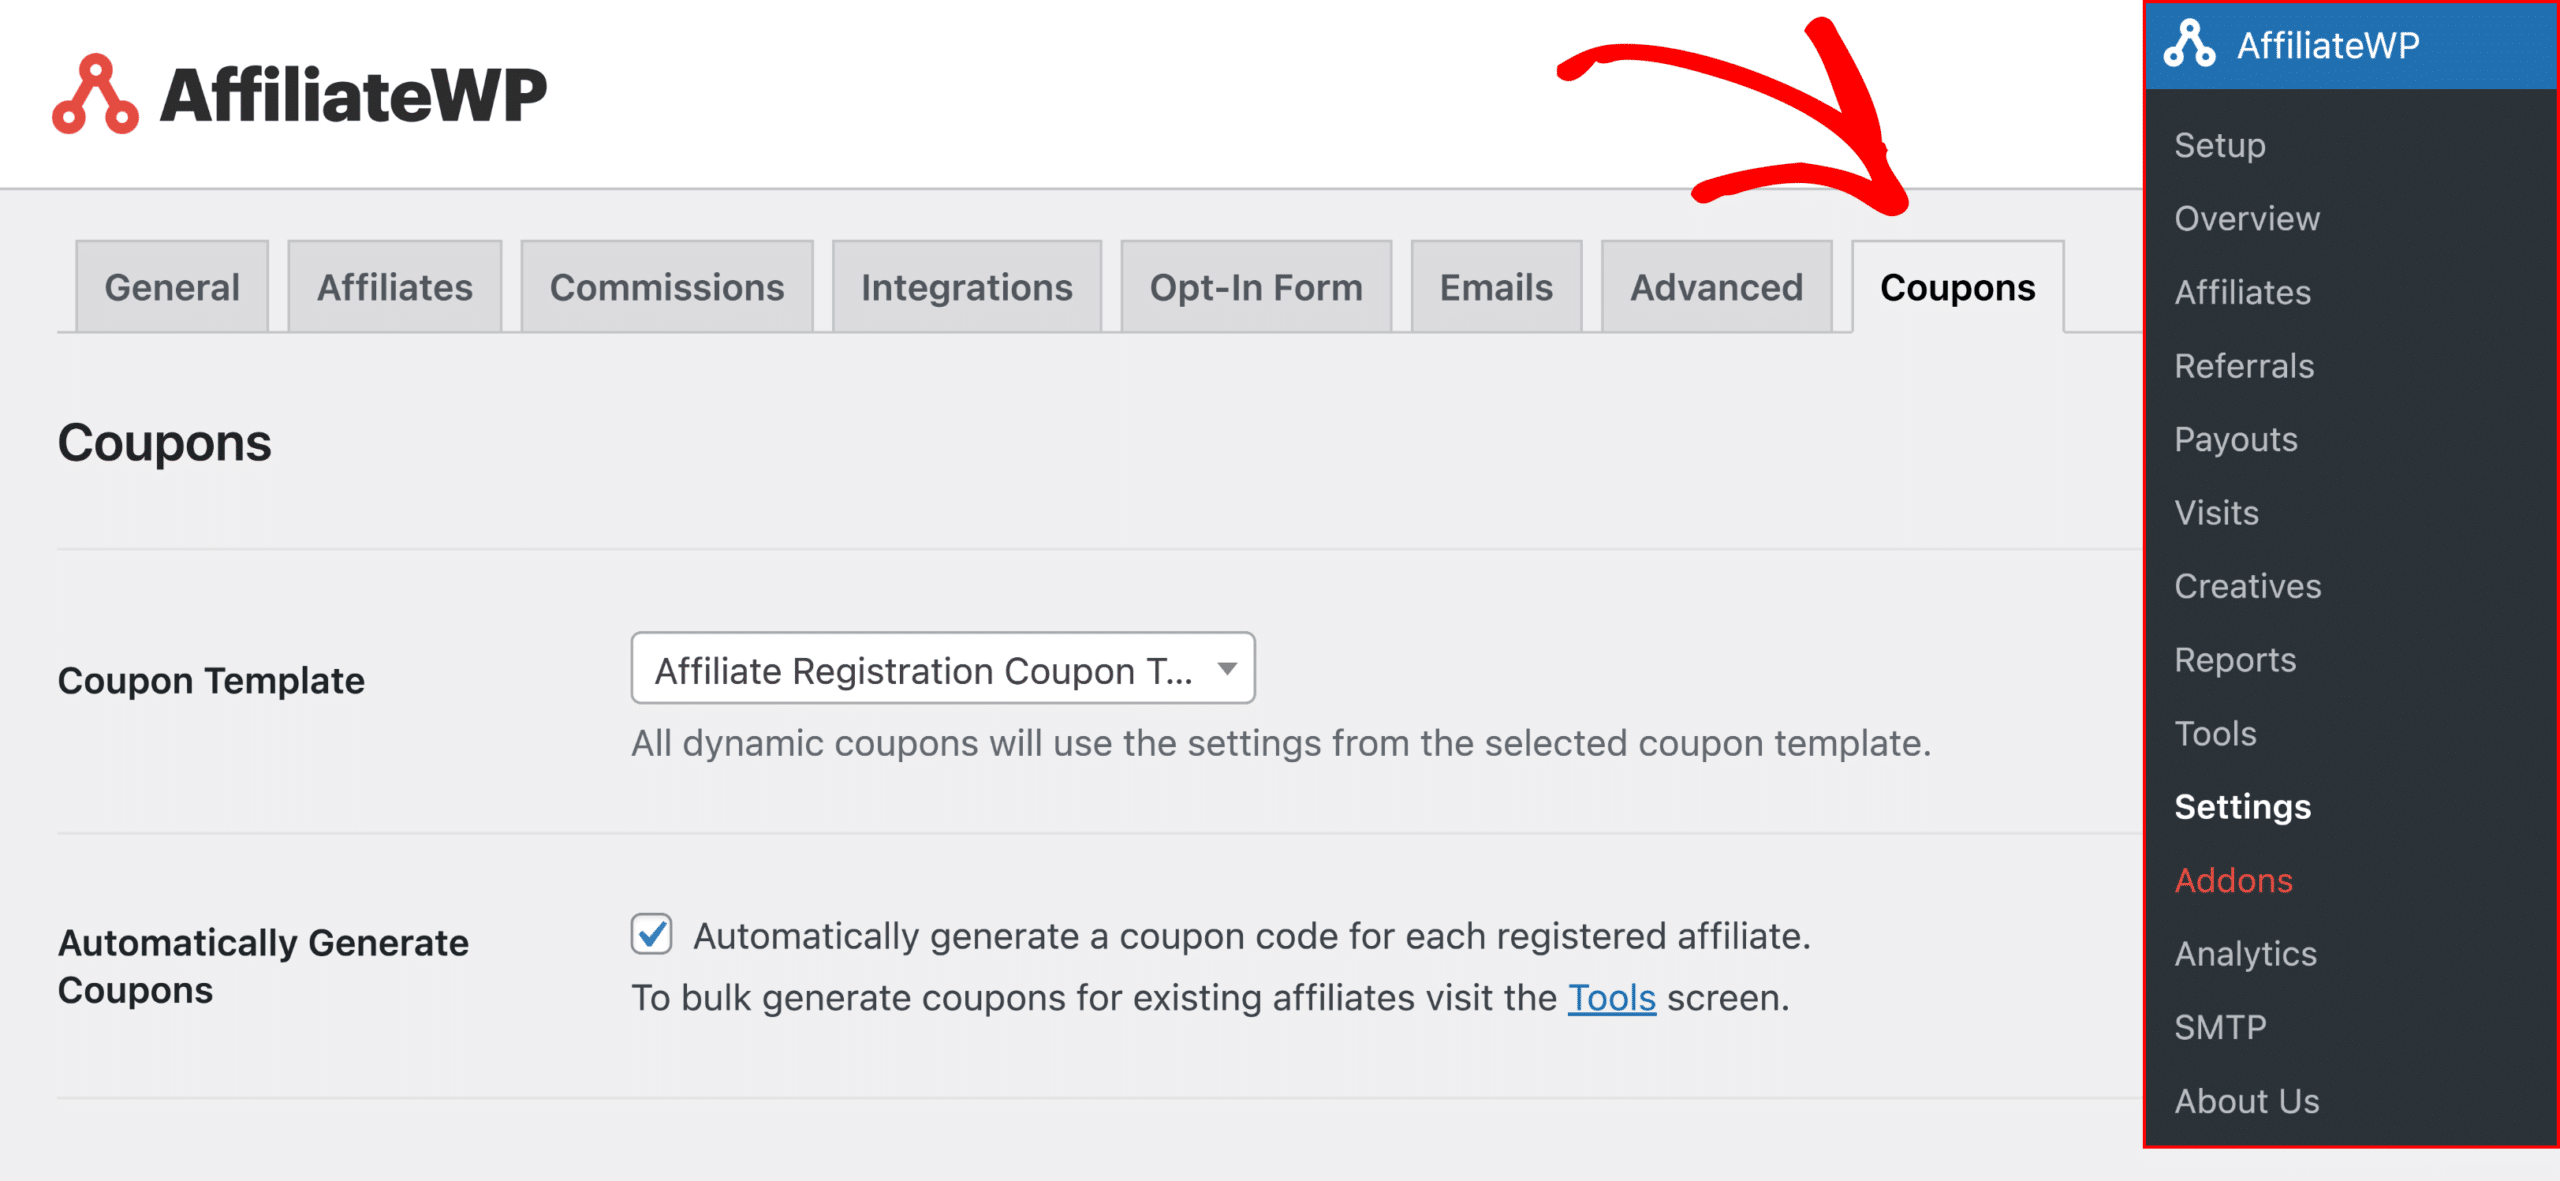 The Coupons tab in AffiliateWP's settings